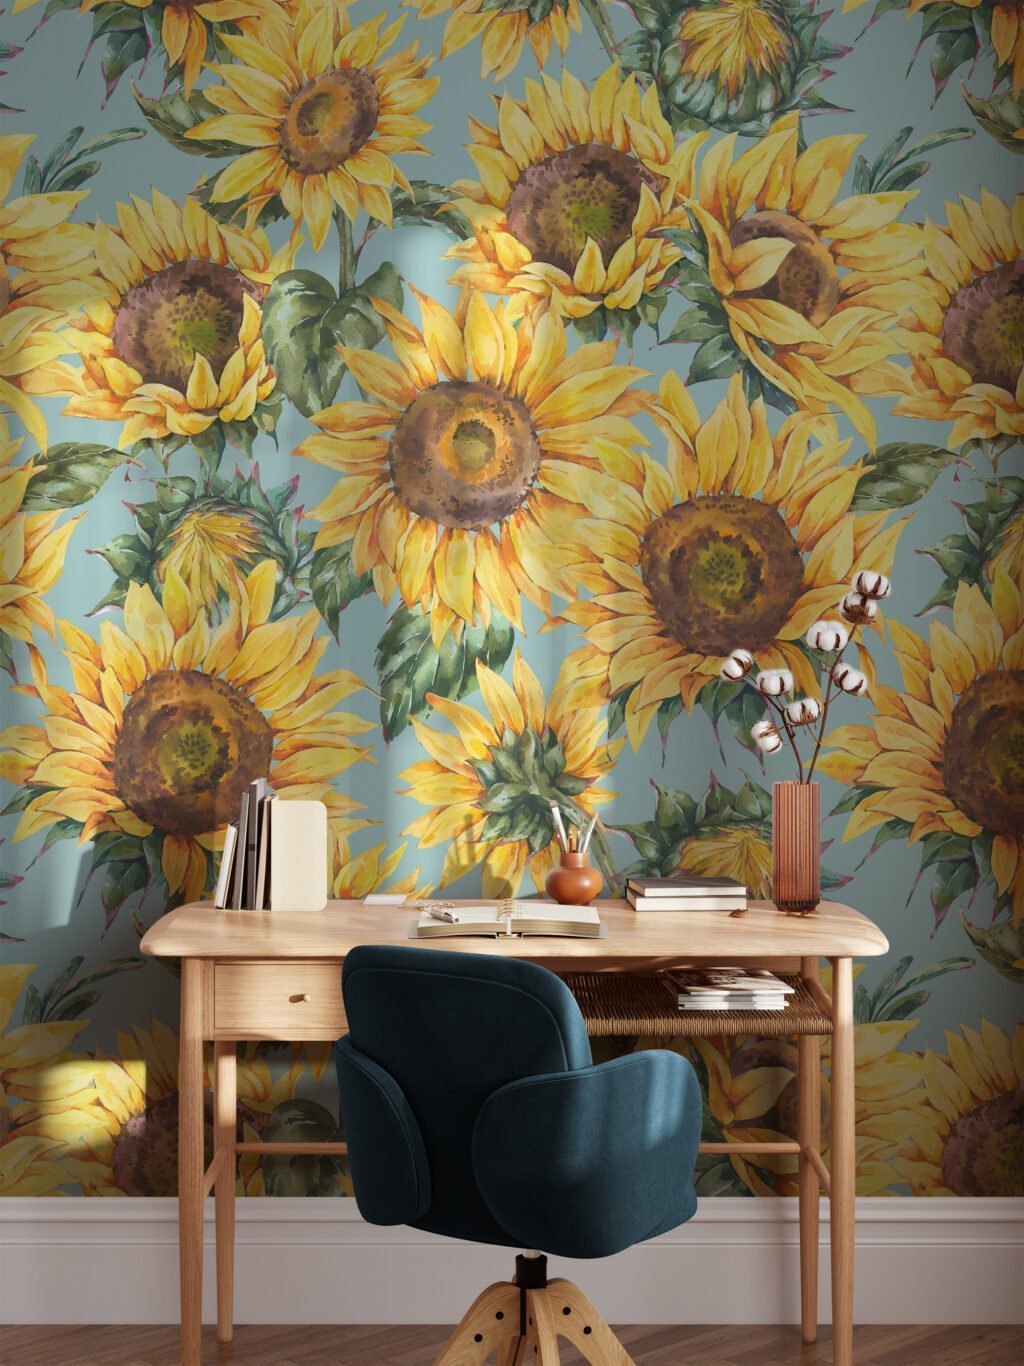 Watercolor Style Sunflowers Floral Illustration Wallpaper, Sunny Flower Peel & Stick Wall Mural